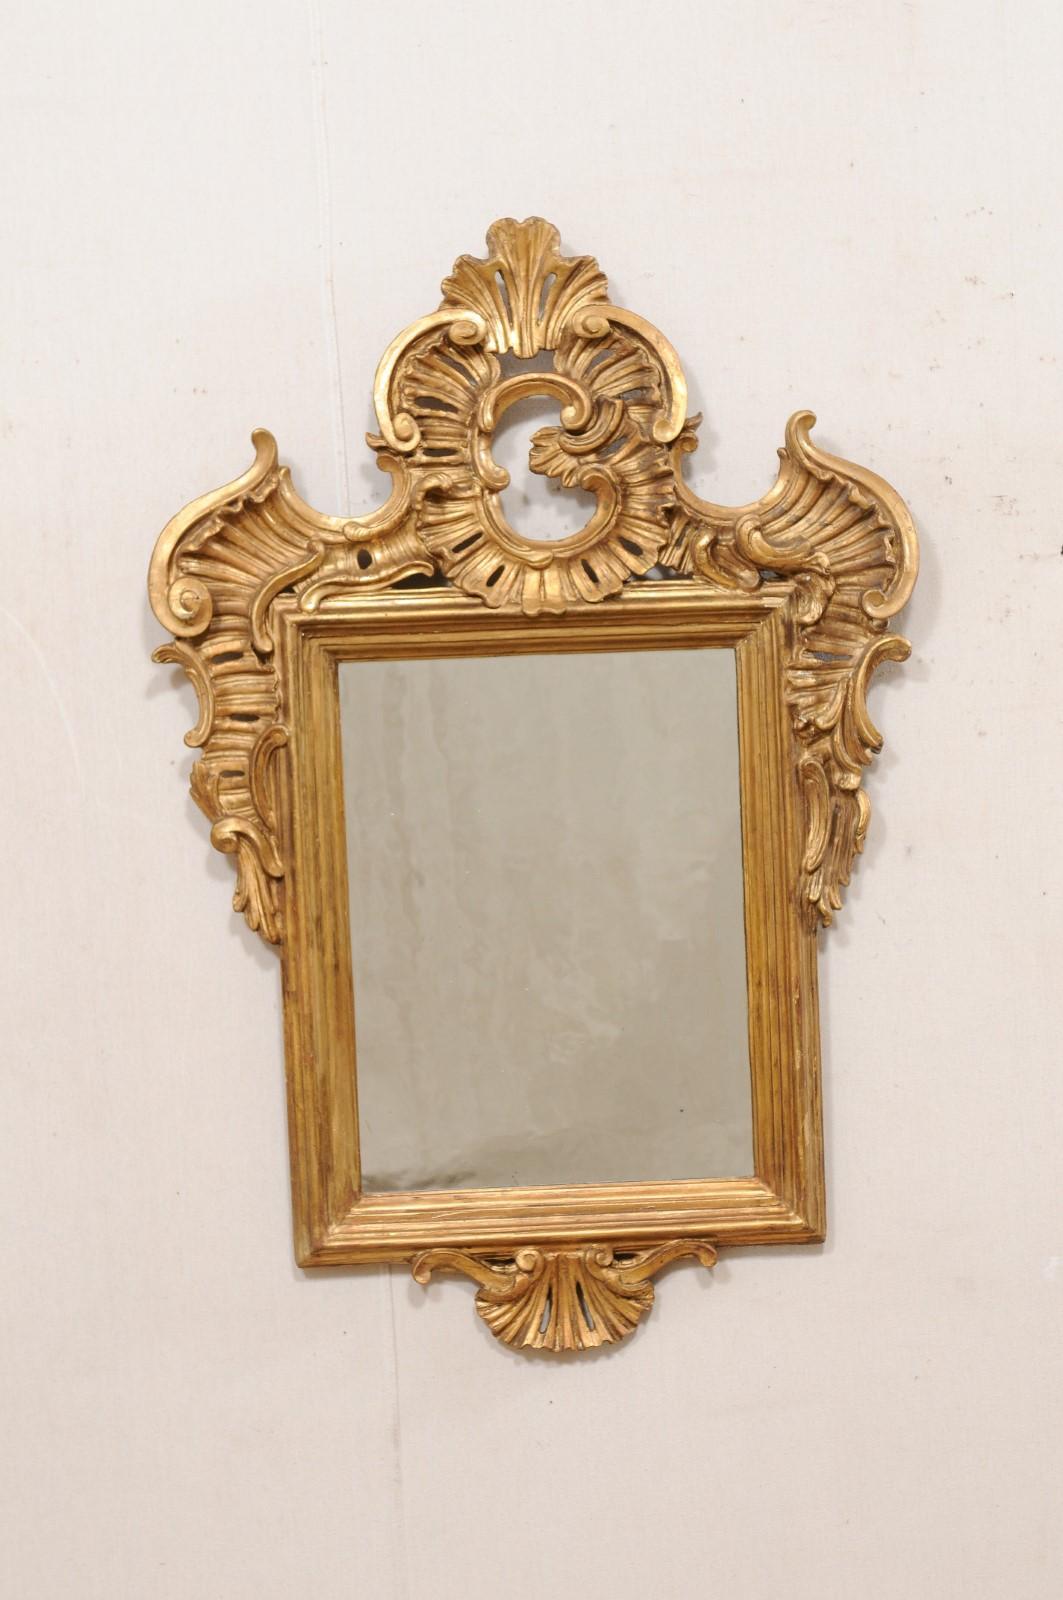 European Continental Baroque Gilt Mirror w/Beautiful Pierce-Carved Crest, Late 18th C. For Sale